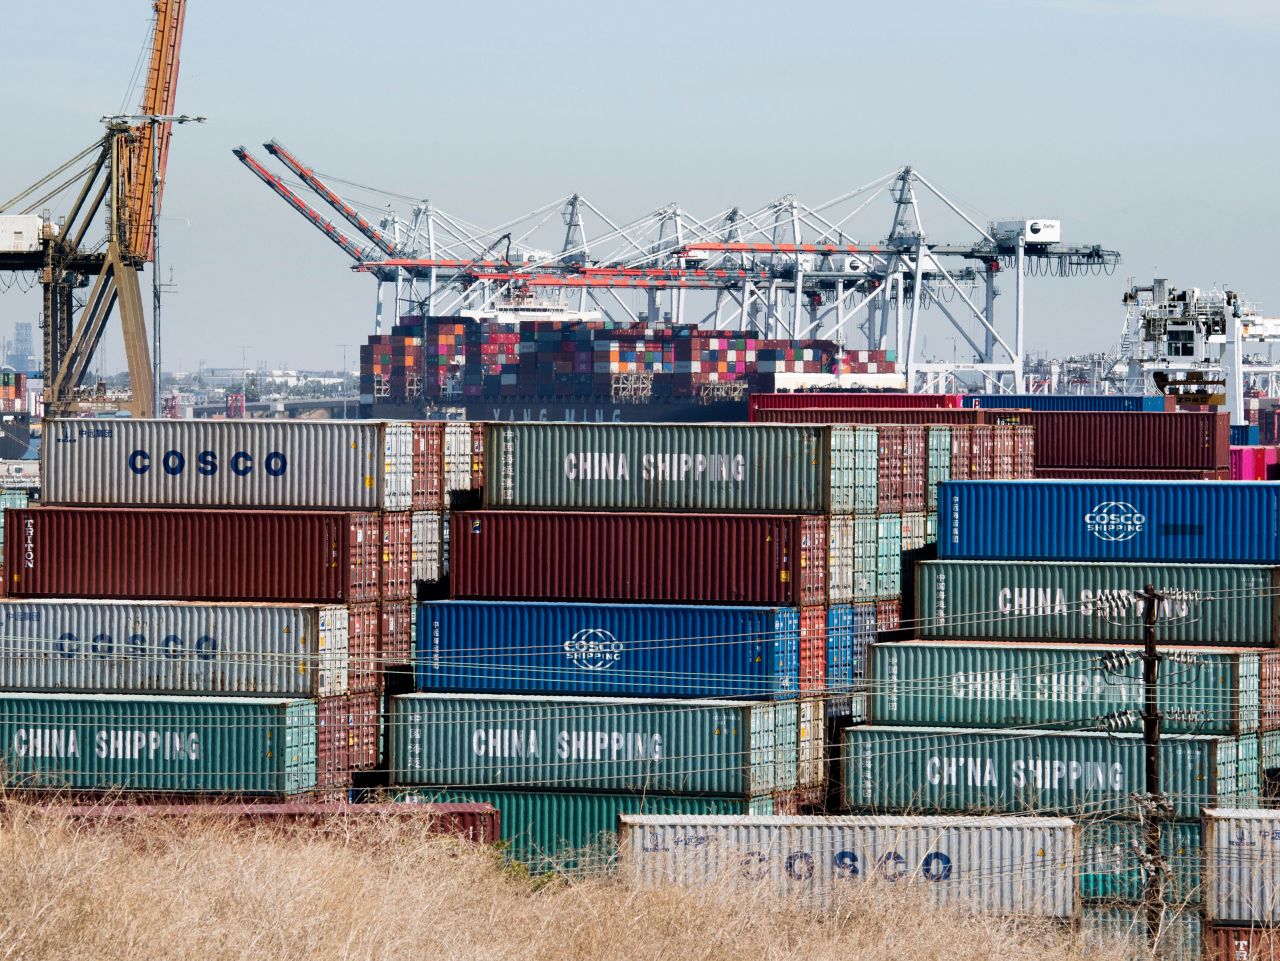 Shipping containers from China and other Asian countries are unloaded at the Port of Los Angeles on September 14, 2019.